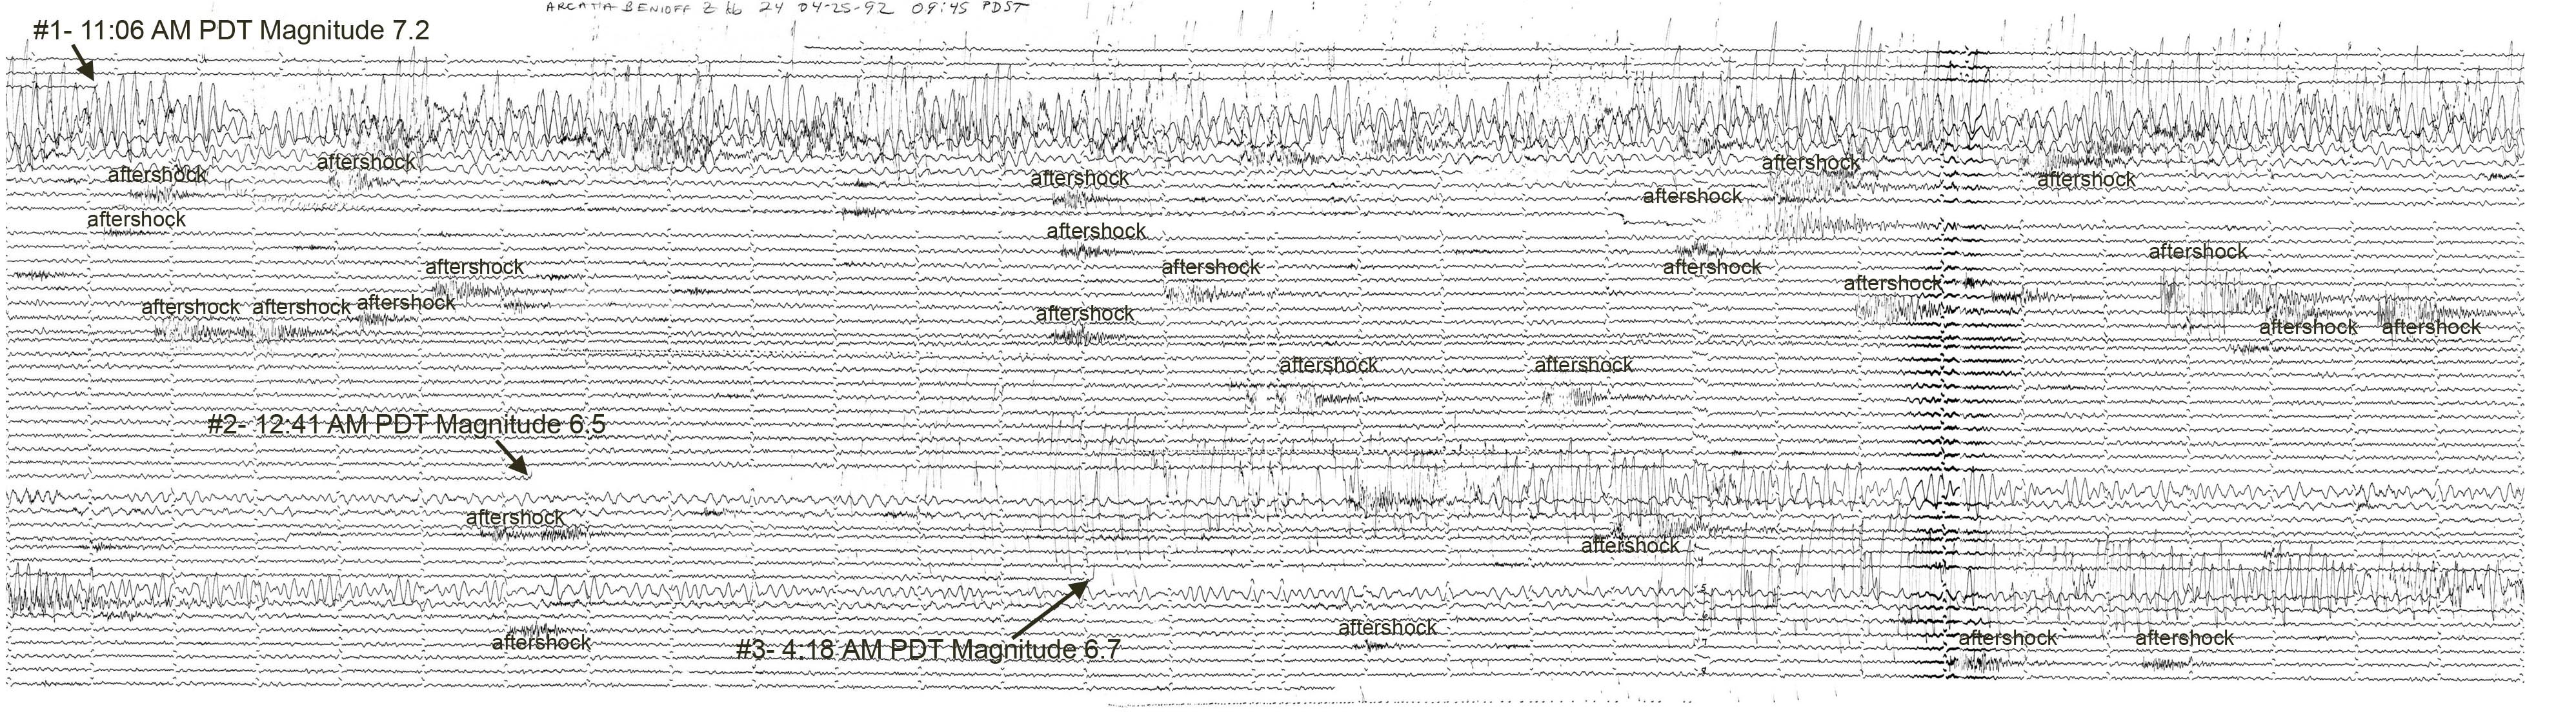 Seismogram of the recorded earthquakes from April 25 & 26, 1992. The earthquakes are labeled with the 3 largest plus aftershocks.